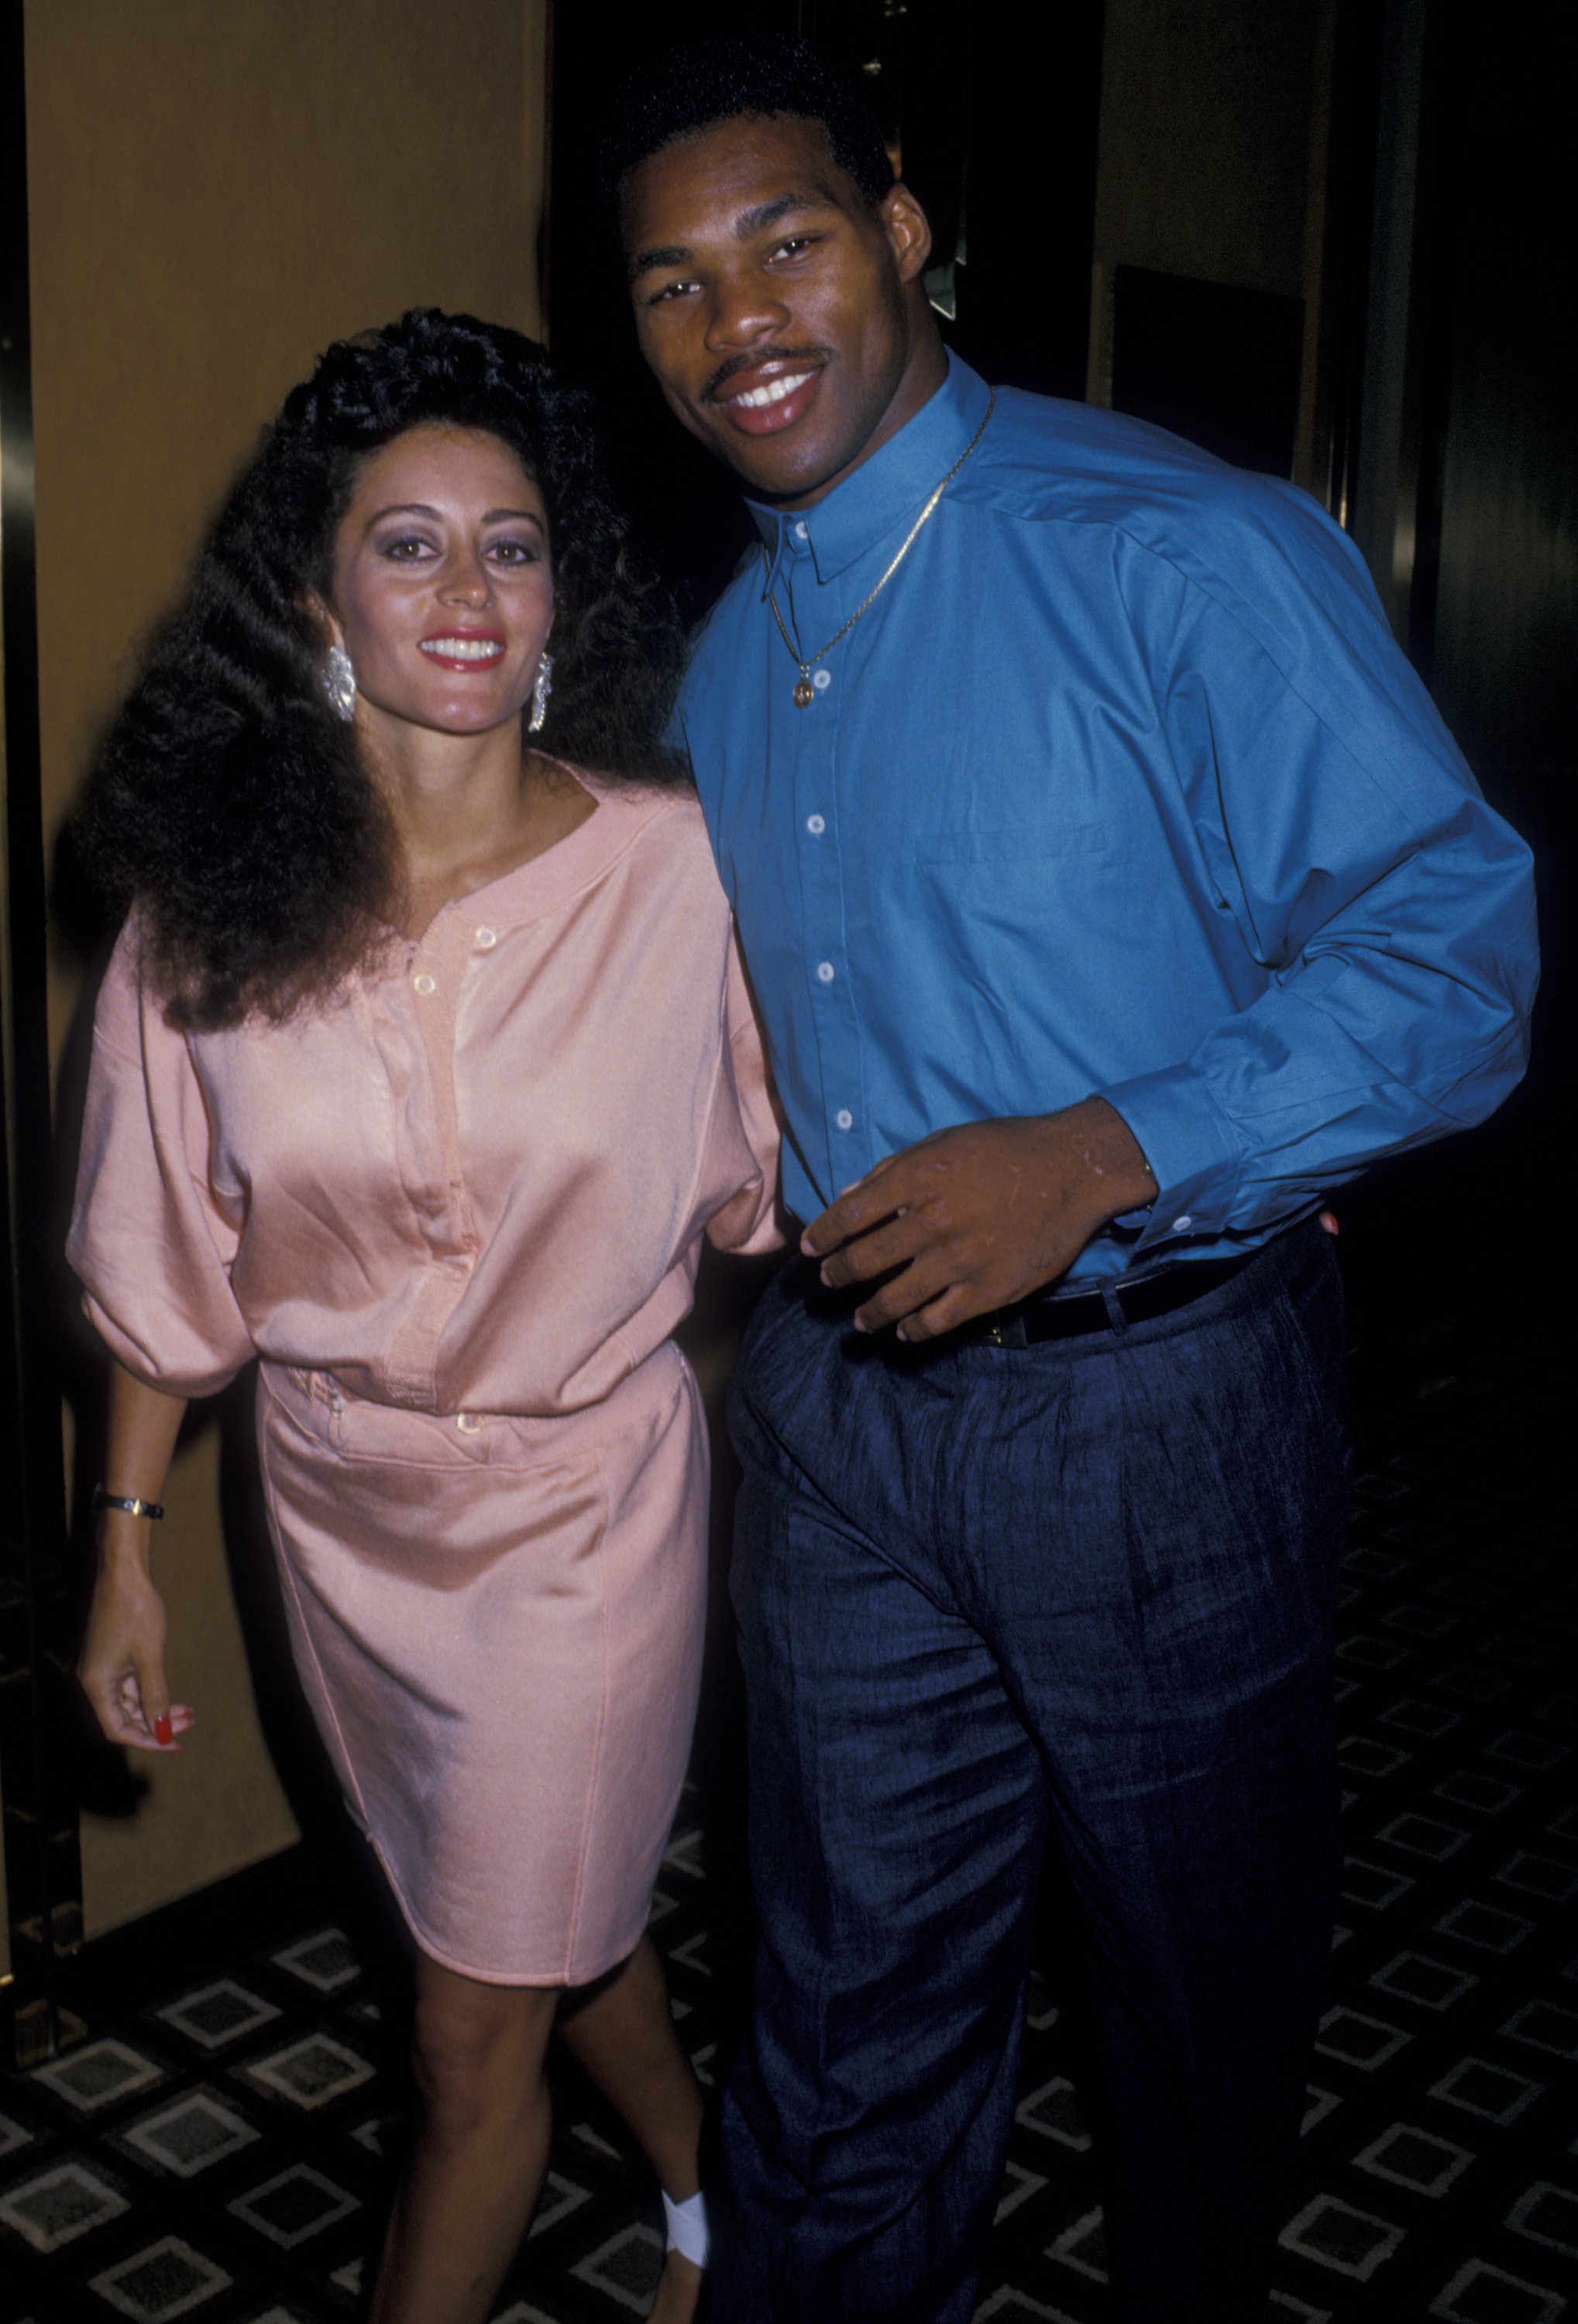 Cindy DeAngelis Grossman and Herschel Walker at the Tyson vs. Spinks Boxing Match on June 27, 1988, in New Jersey. | Source: Getty Images